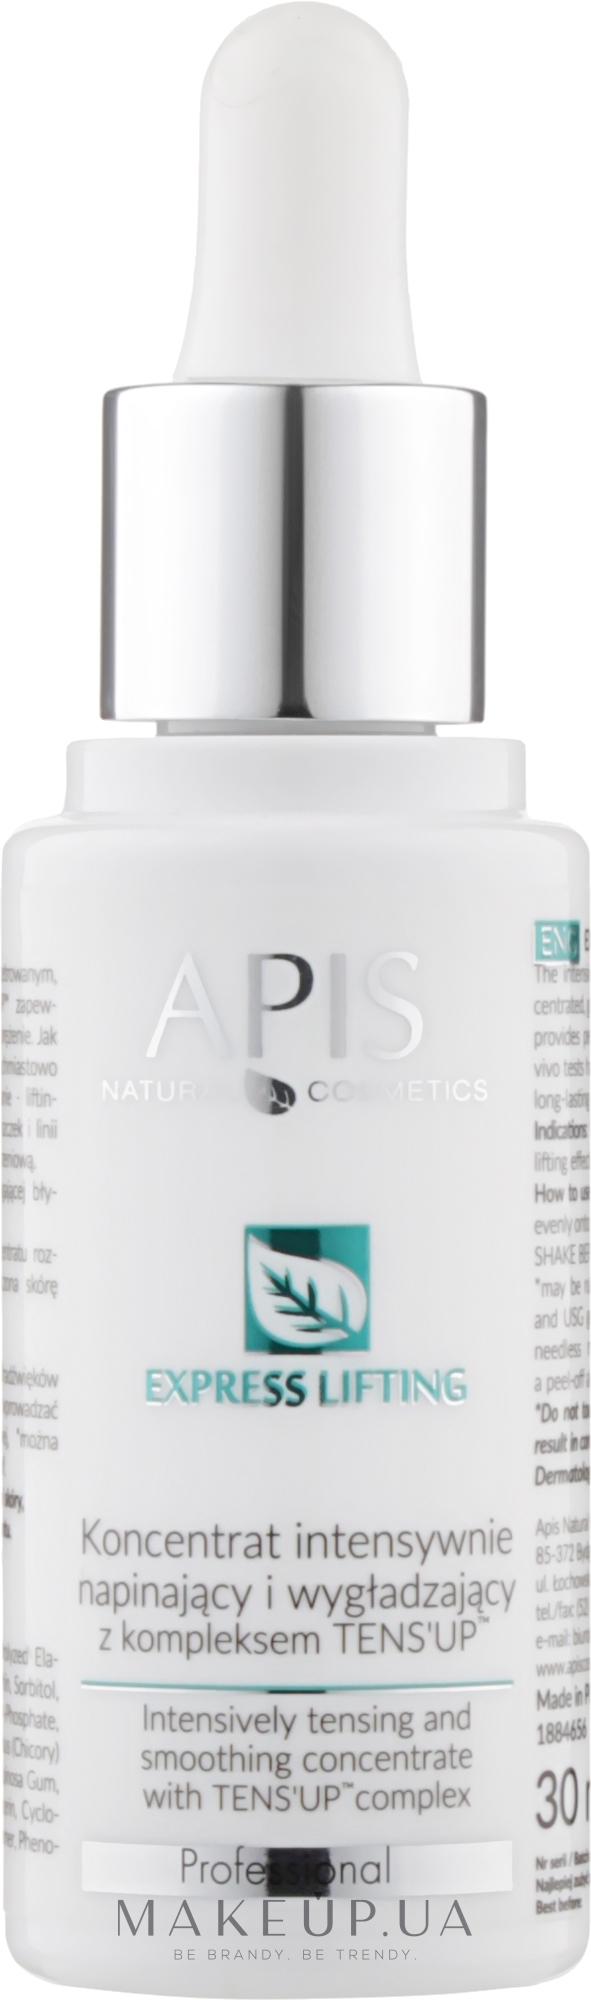 Концентрат для лица - APIS Professional Express Lifting Intensive Tensing And Smoothing Concentrate — фото 30ml